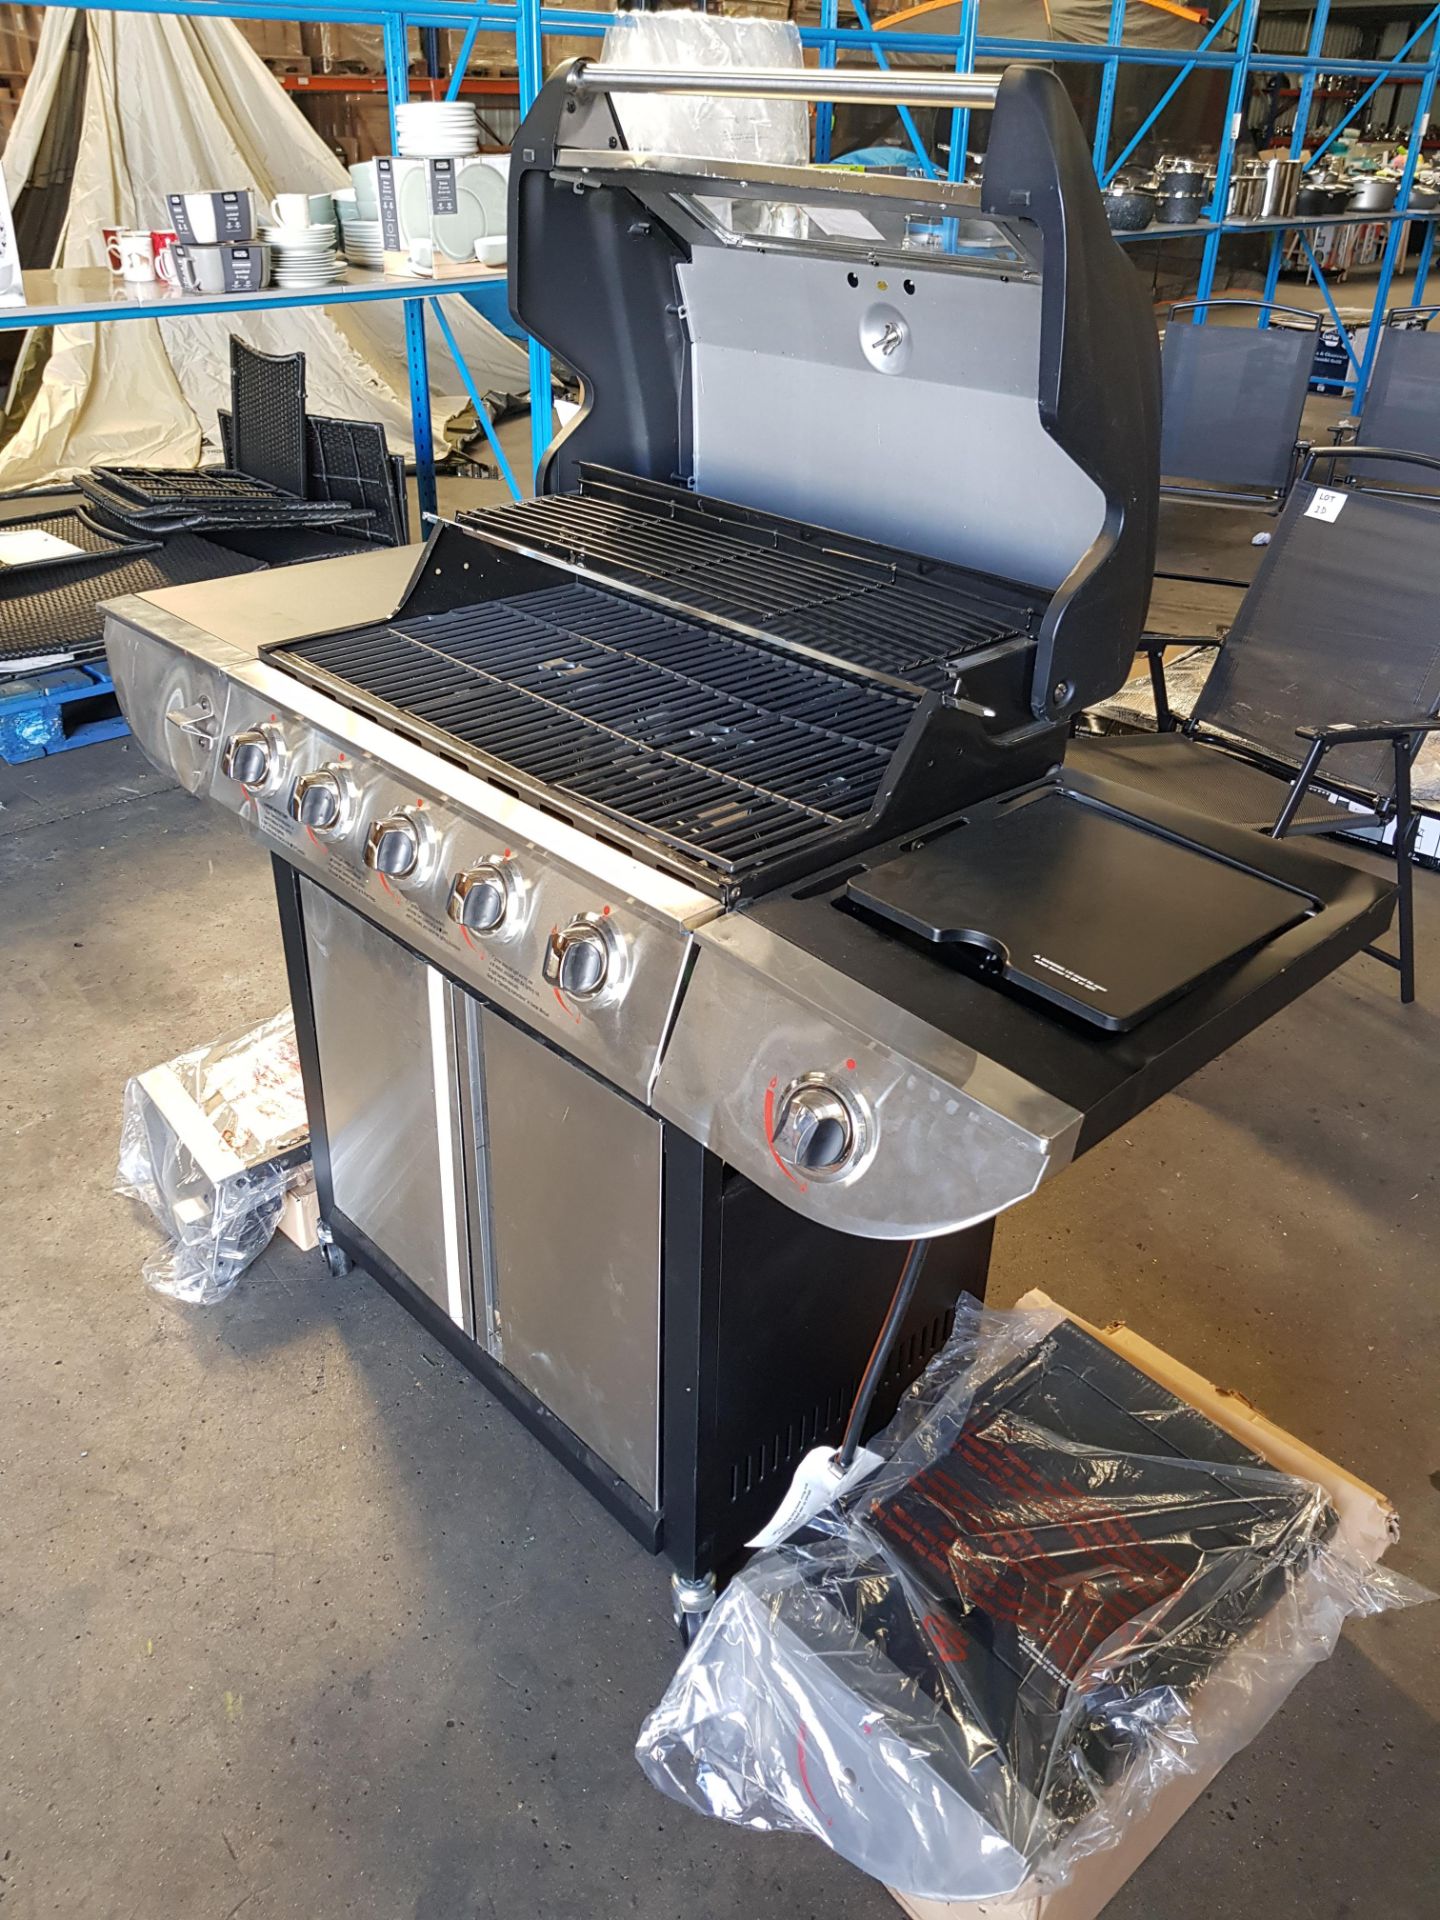 UNIFLAME CLASSIC 5 BURNER, GLASS WINDOW BBQ GRILL WITH SIDE BURNER. - Image 2 of 2